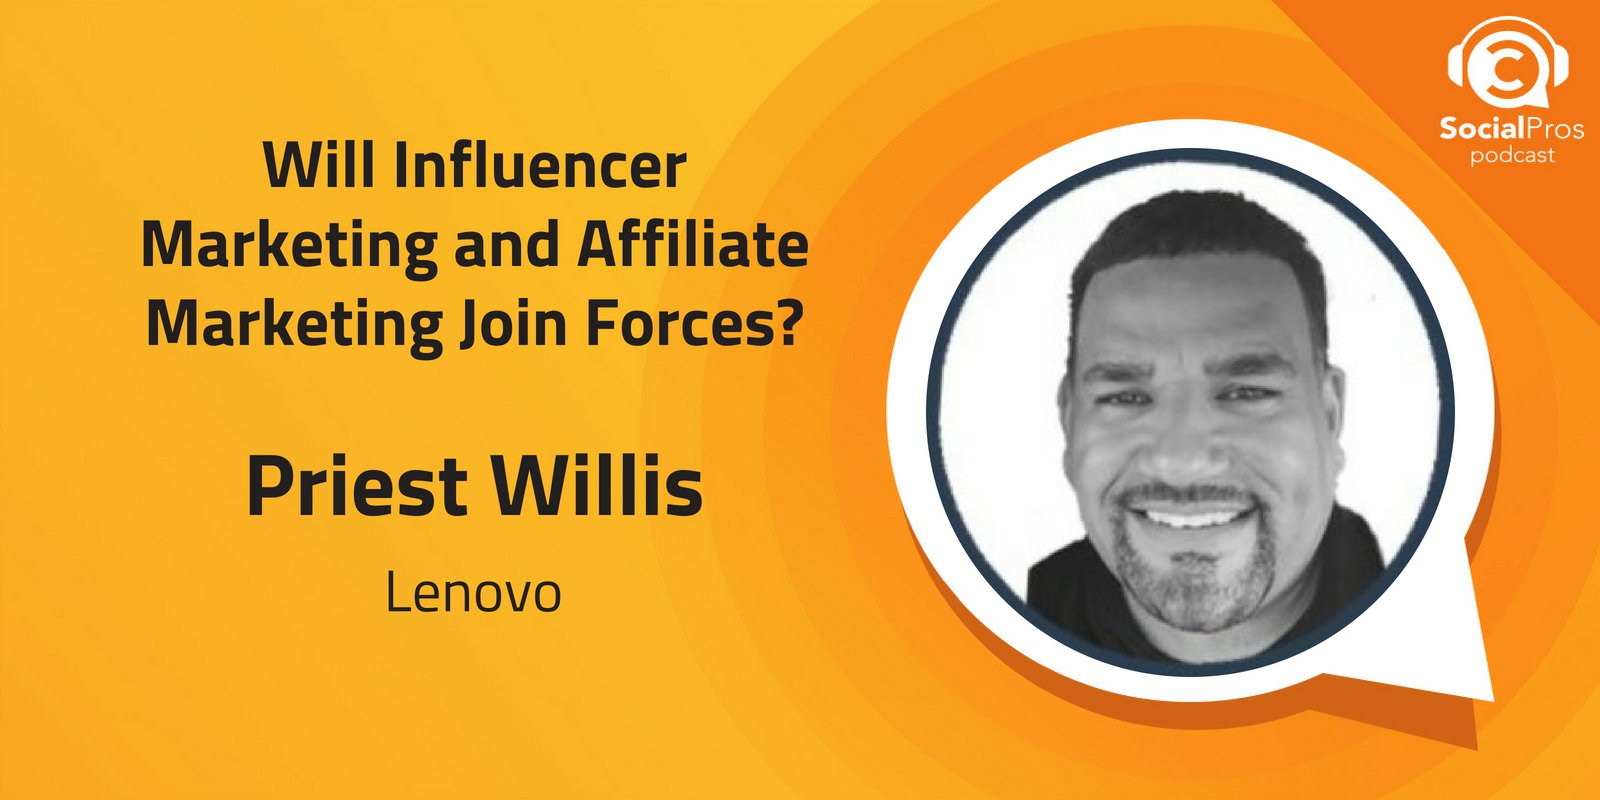 Will Influencer Marketing and Affiliate Marketing Join Forces?